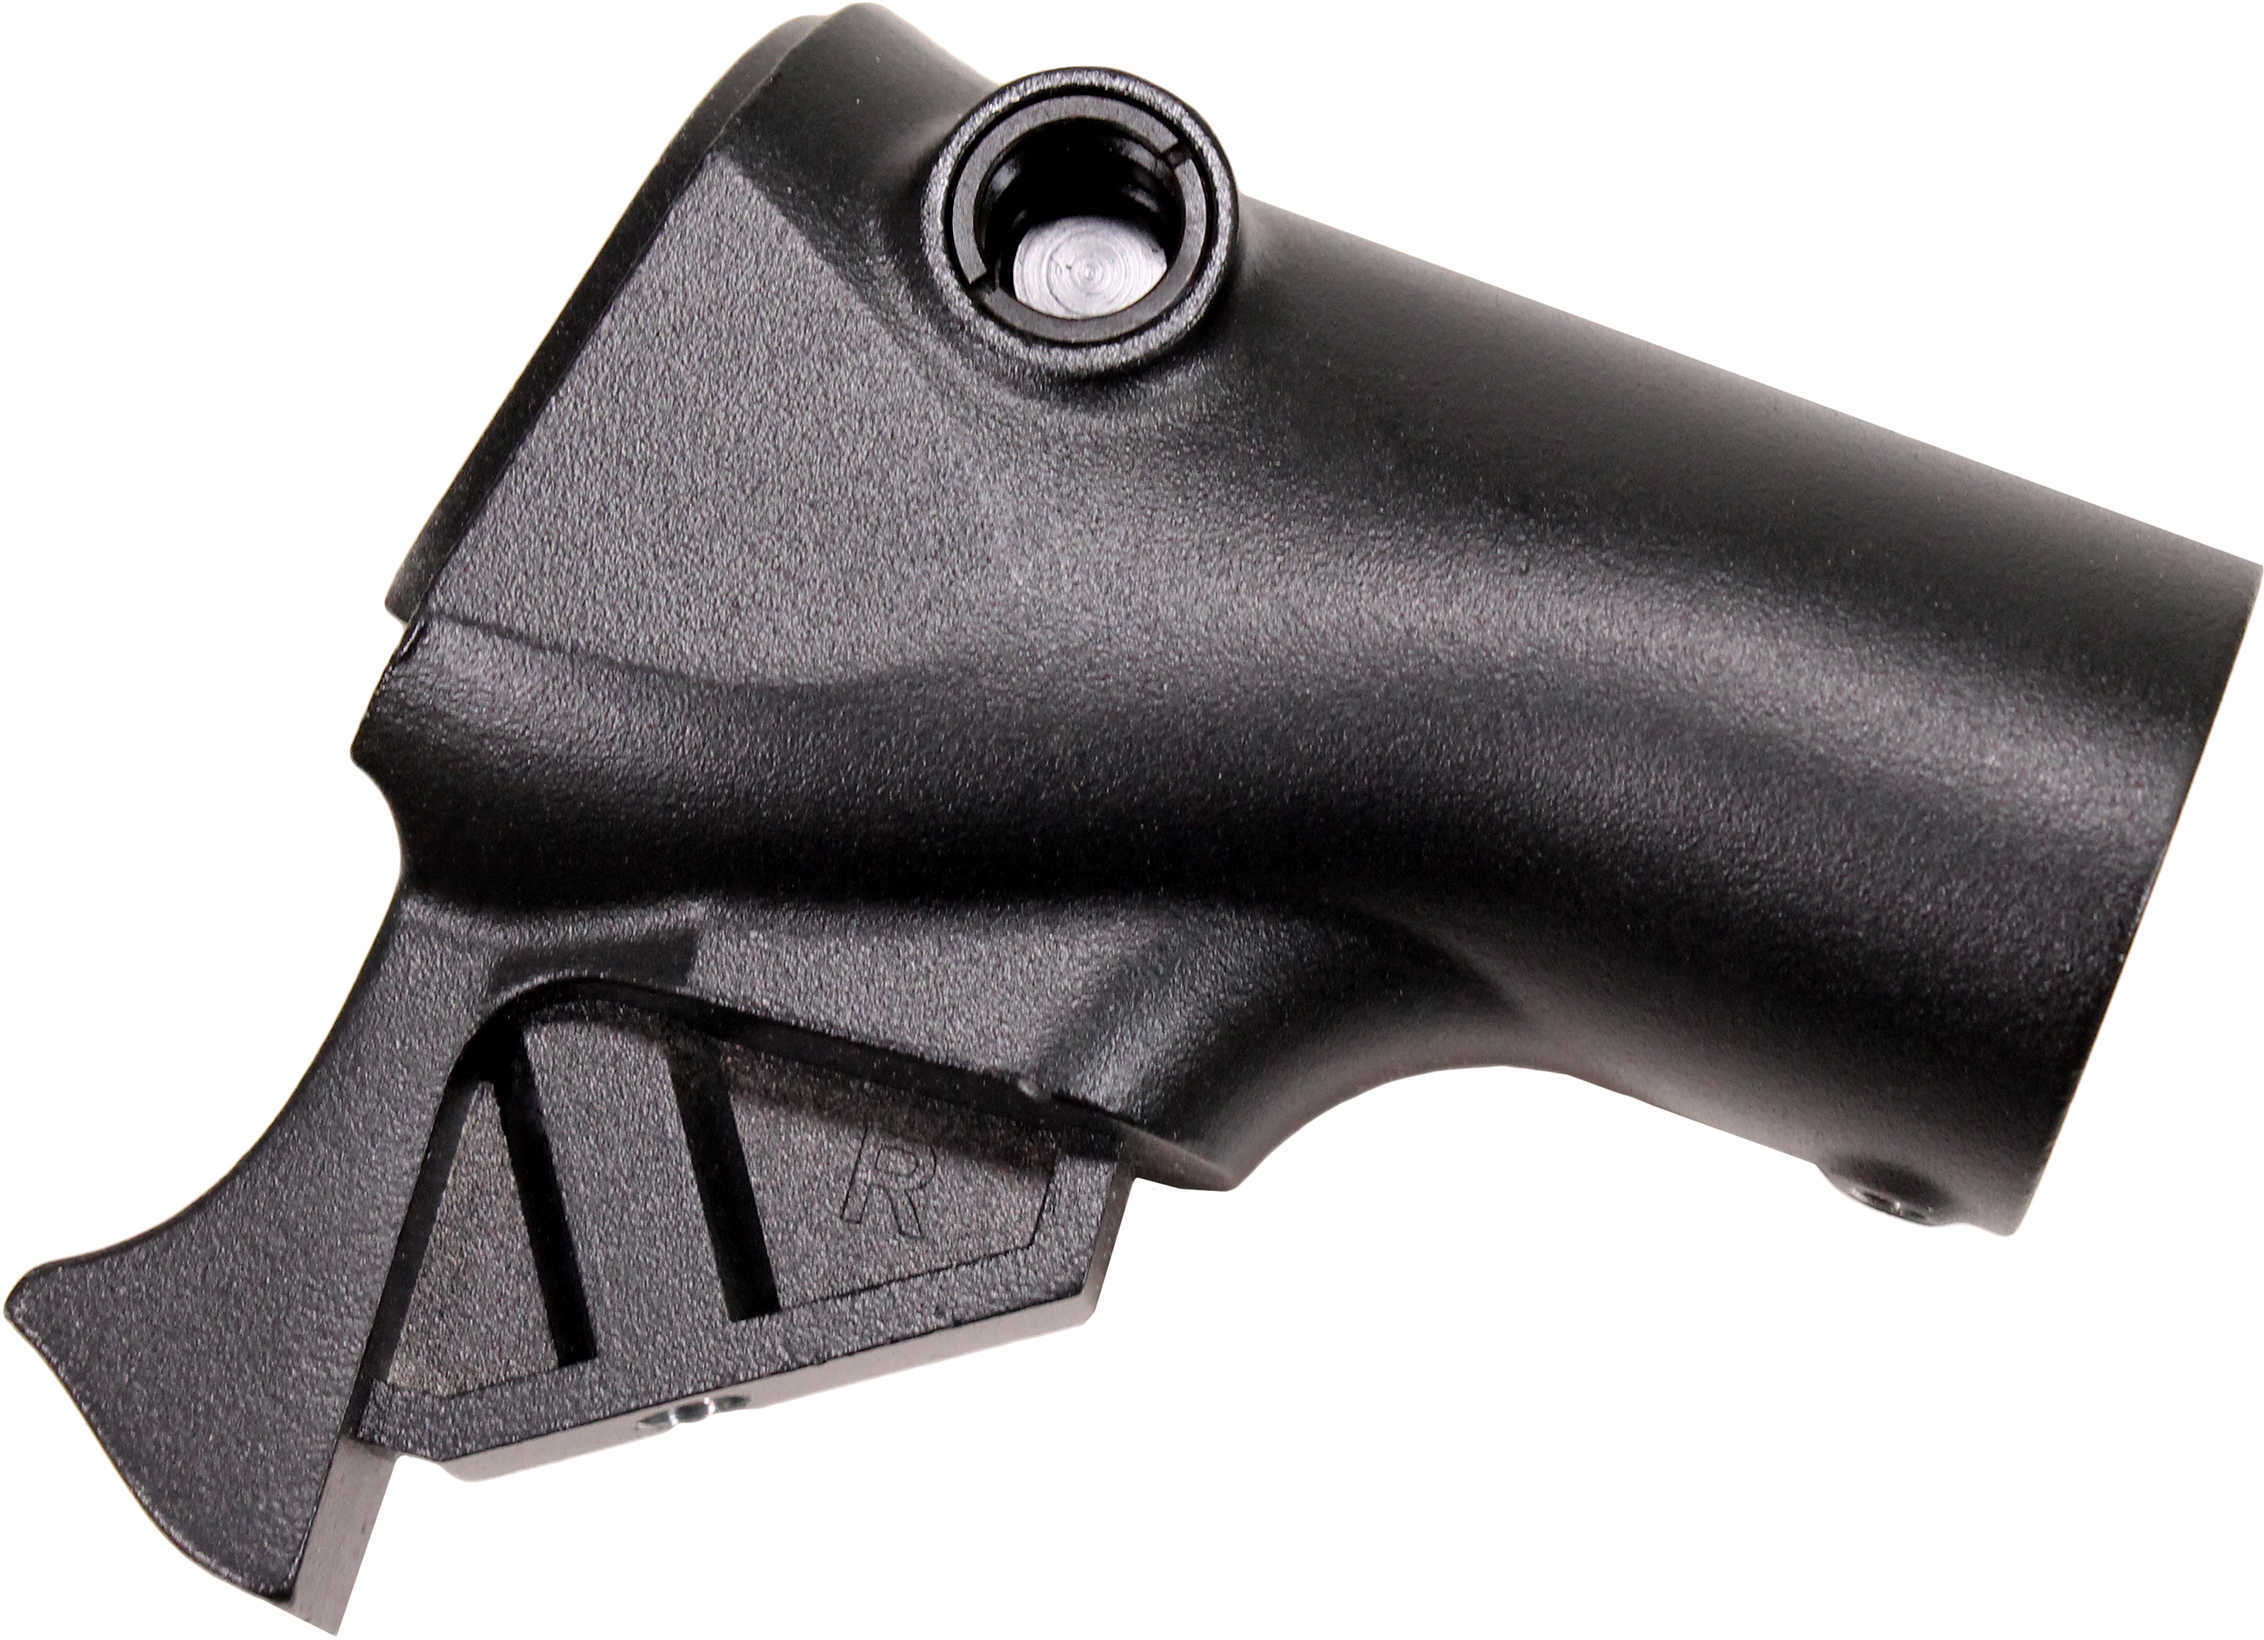 TacStar Stock Adapter To Mil- Spec AR-15 For Rem. 870 12 Gauge Md: 1081231